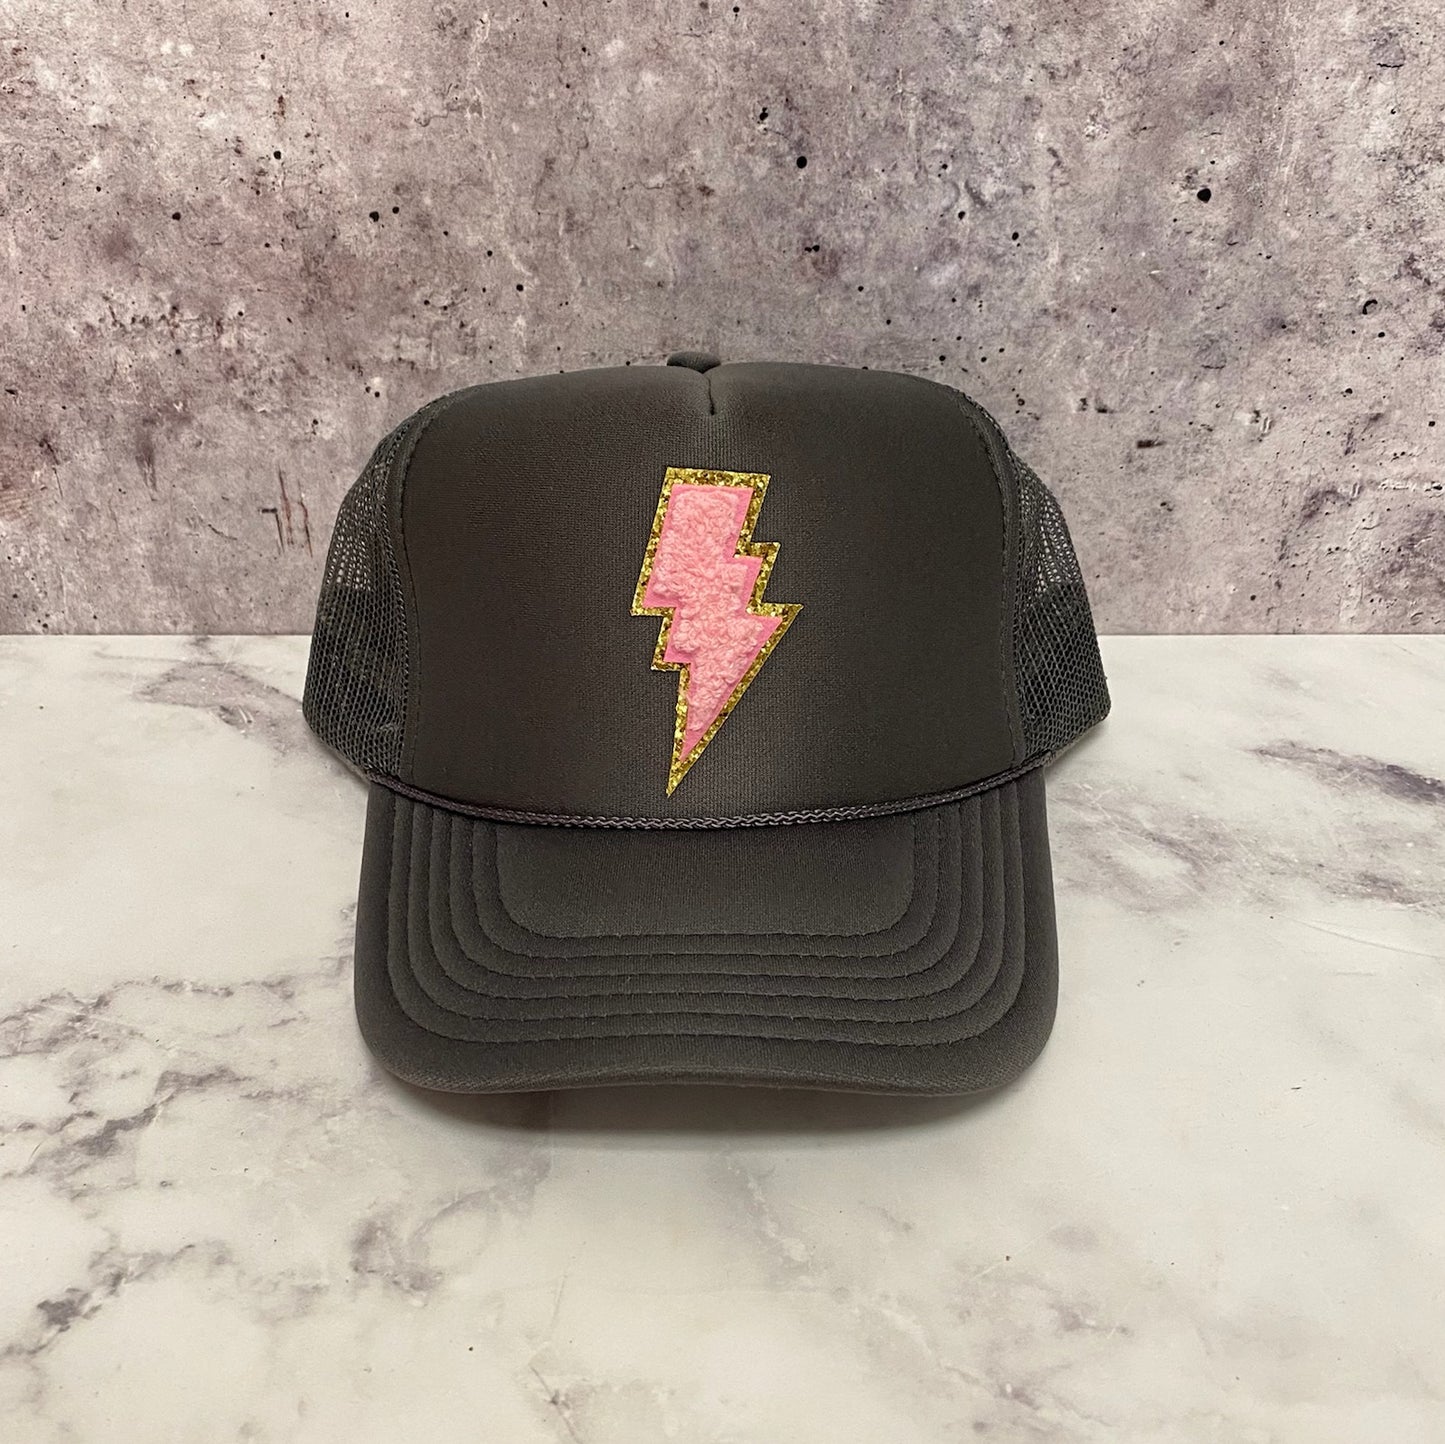 Trucker Hat with Pink Bolt Patch